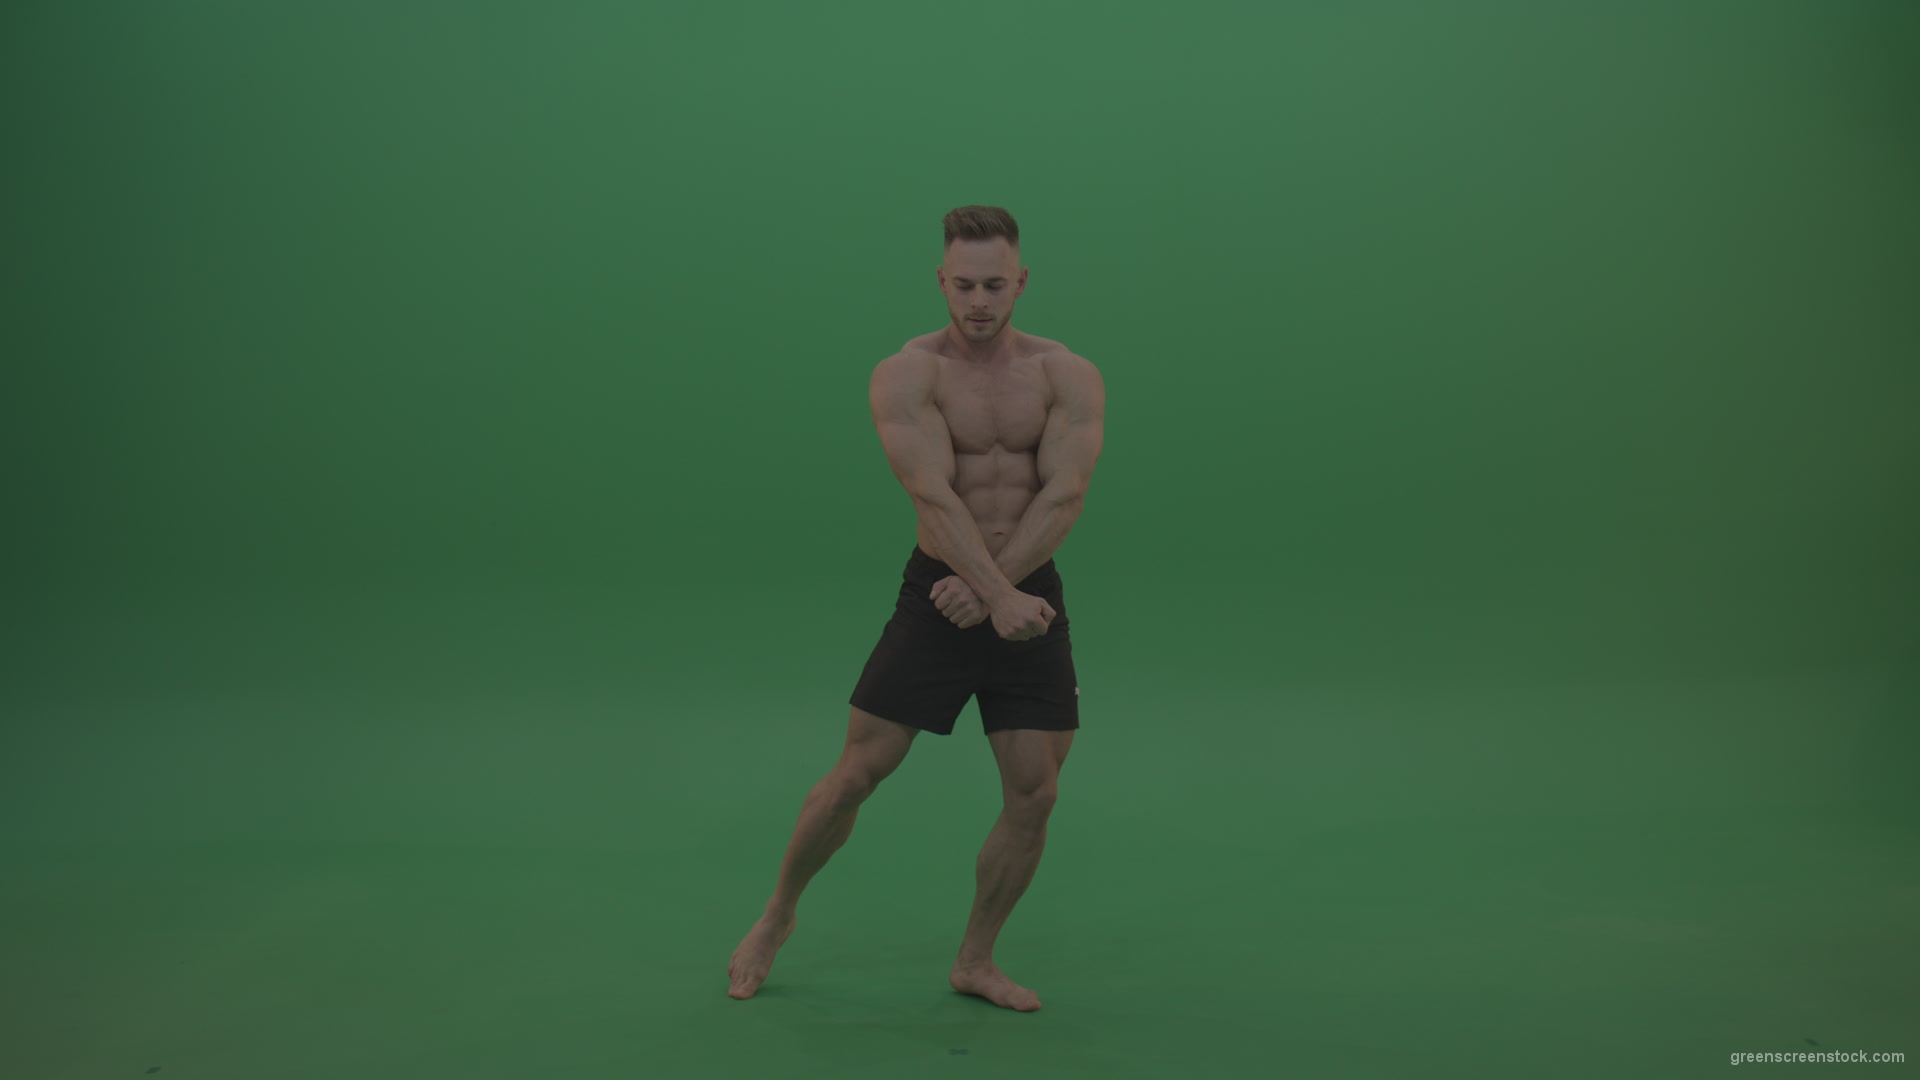 Young_Athletic_Bodybuilder_Demonstrating_Front_Double_Biceps_And_Lateral_Spread_Positions_On_Green_Screen_Wall_Background_004 Green Screen Stock